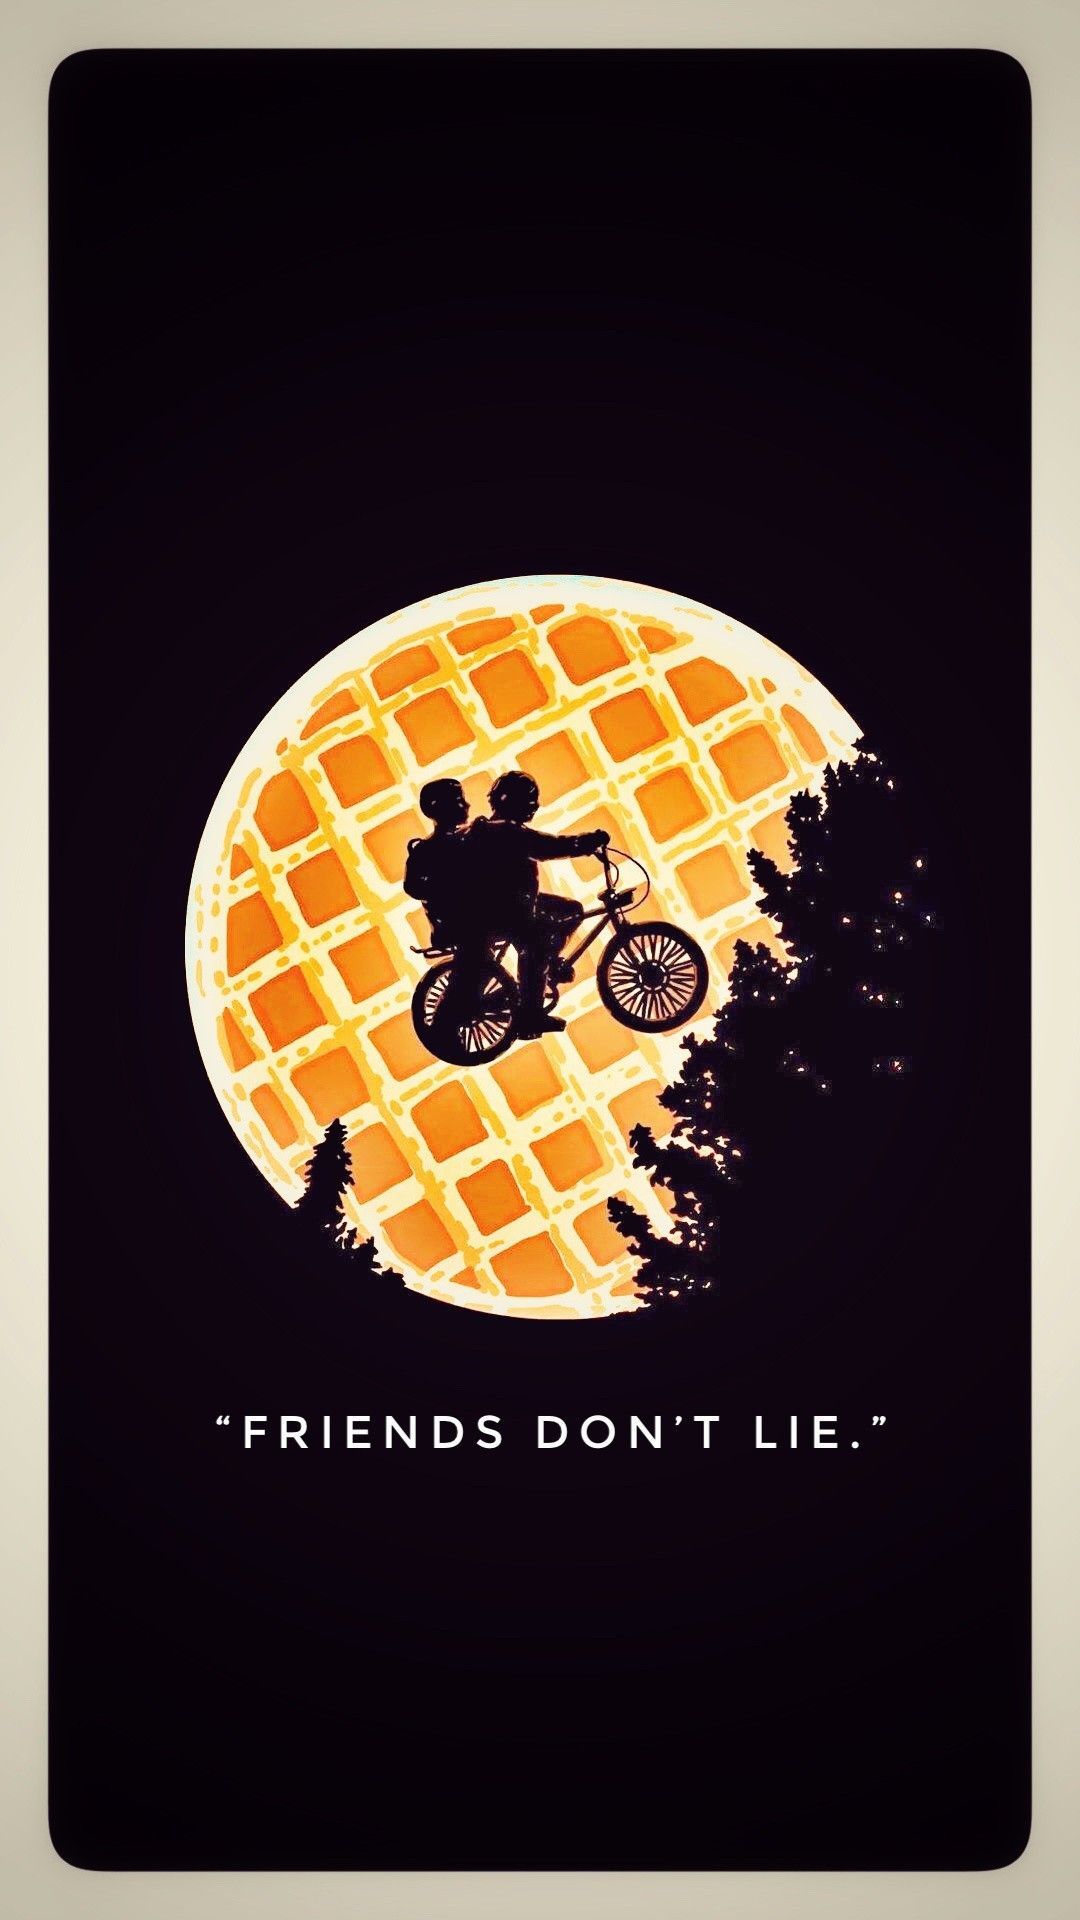 Stranger Things and E.T. iPhone wallpaper. Friends don't lie. - Stranger Things